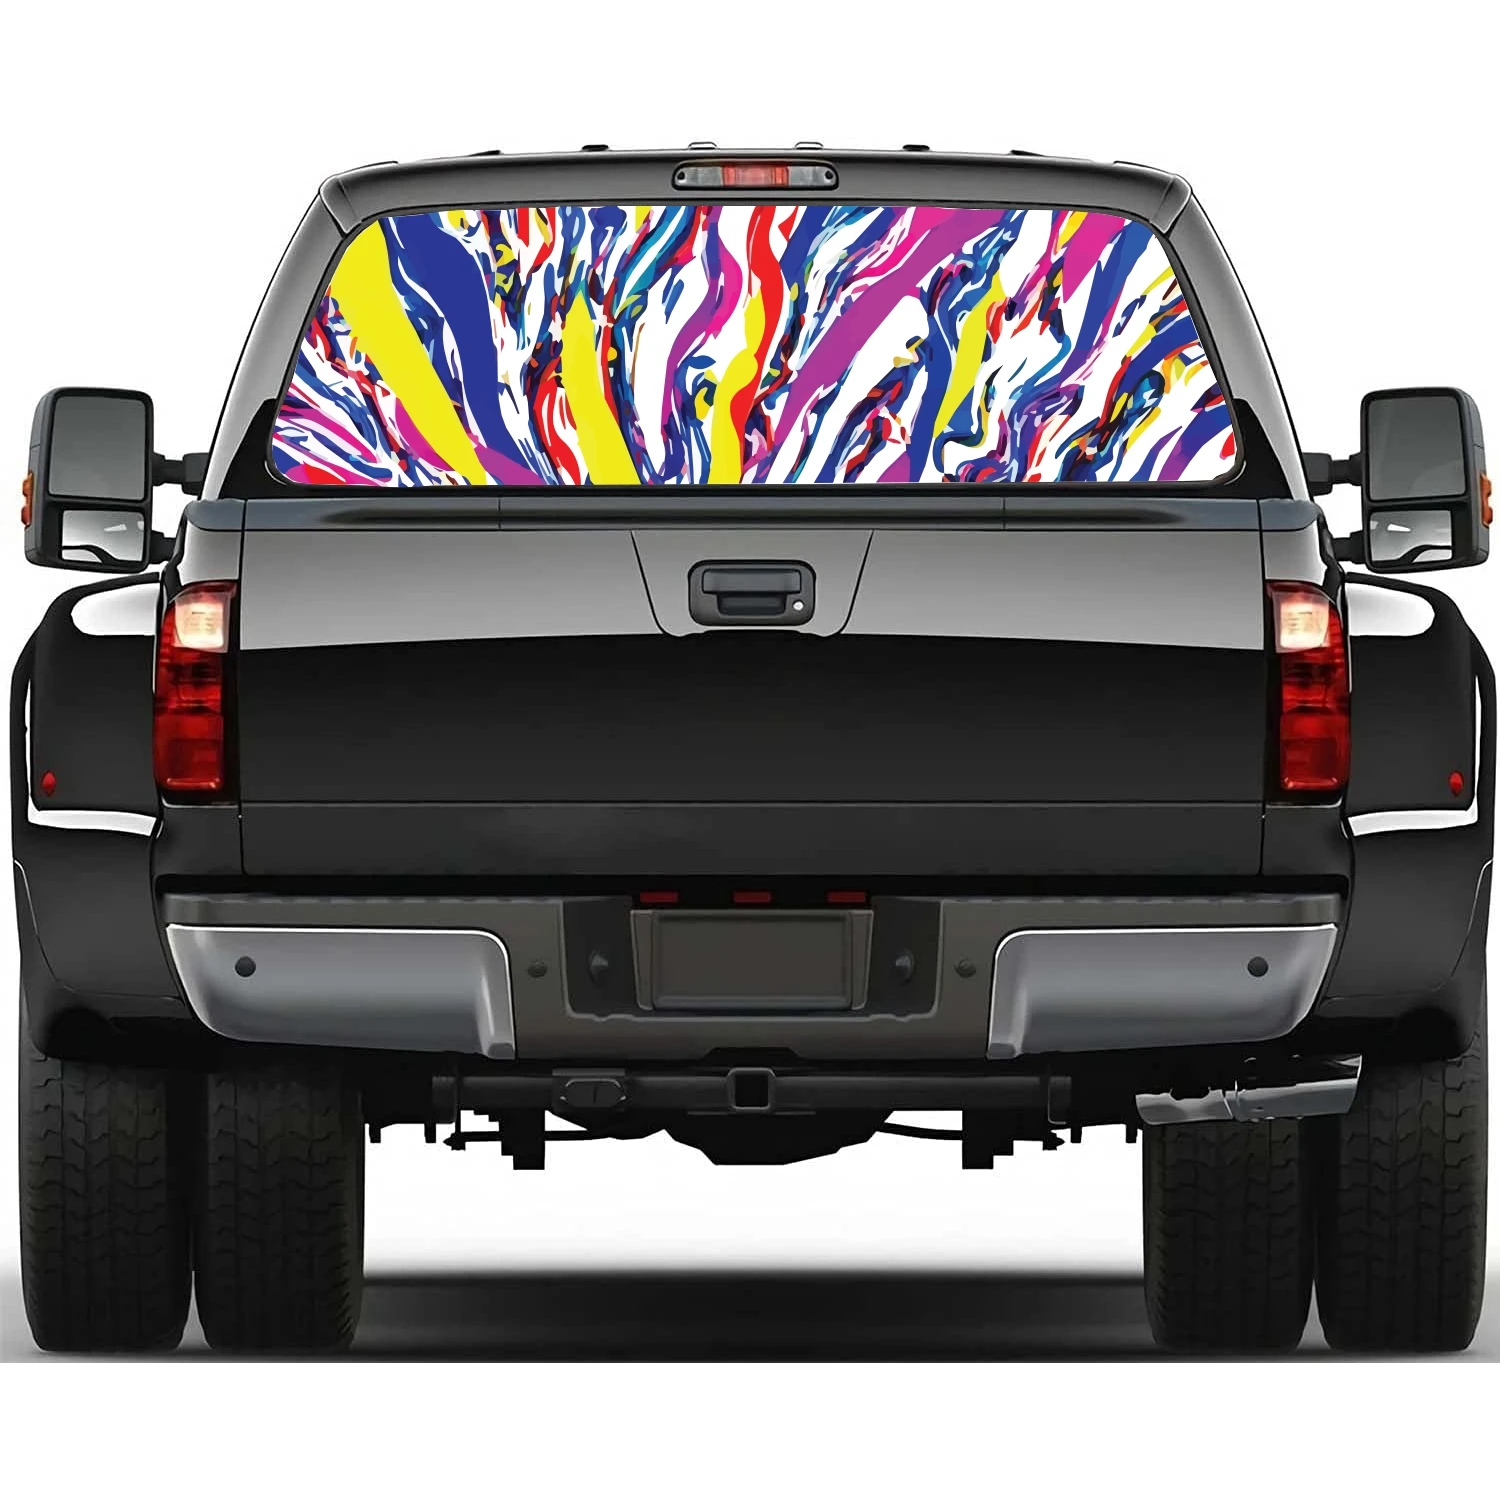 

Colorful Abstract Painting Rear Window Decal Fit Pickup,Truck,Car Universal See Through Perforated Back Windows Vinyl Sticker